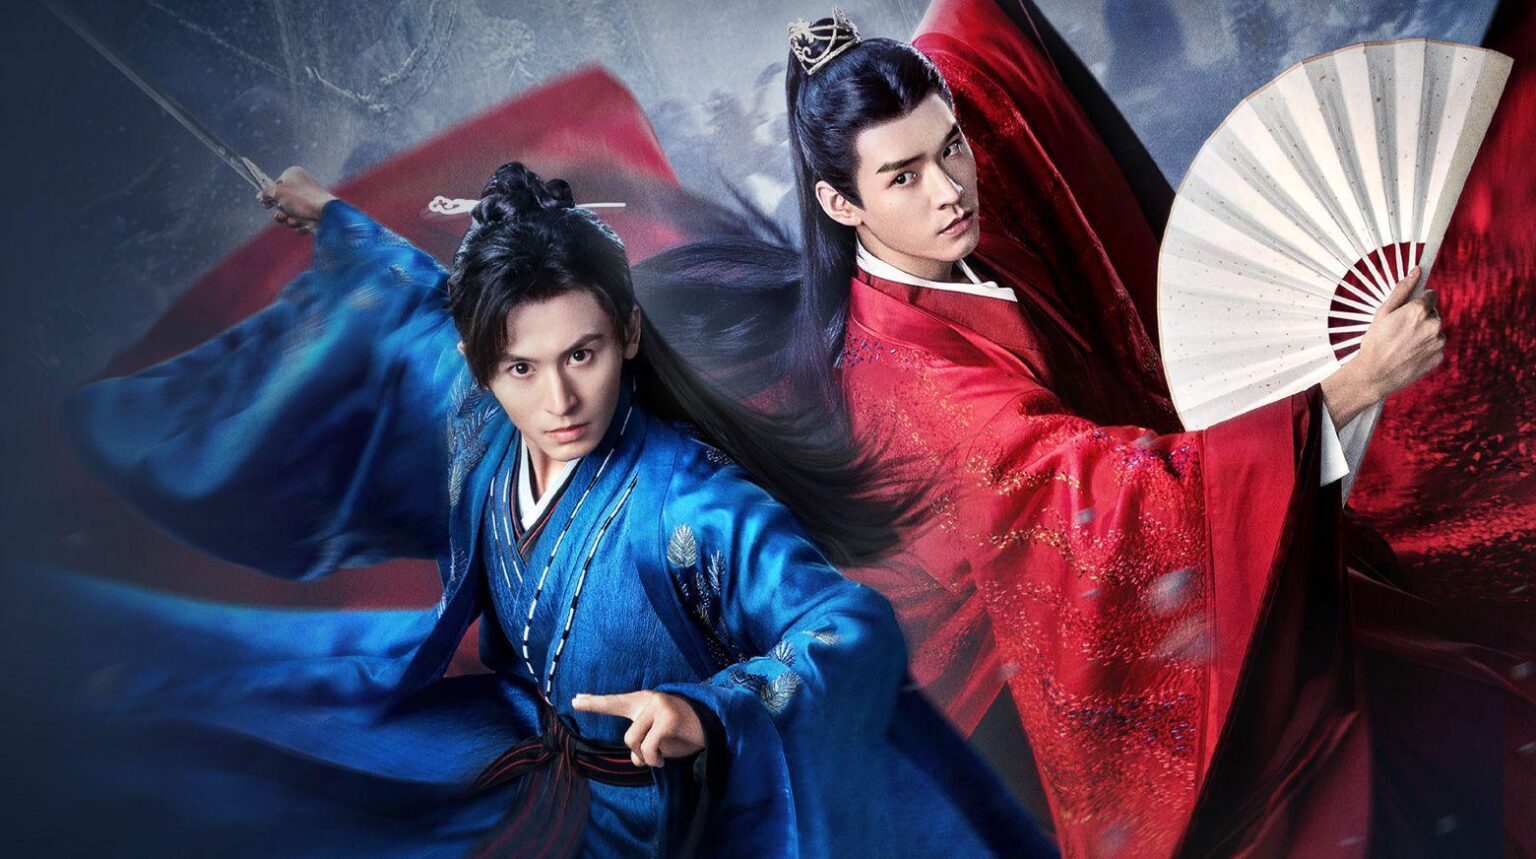 If you’re reading this, you’re probably aware that 'Word of Honor' is the latest smash hit BL period drama from China. Where can you catch the actors next?